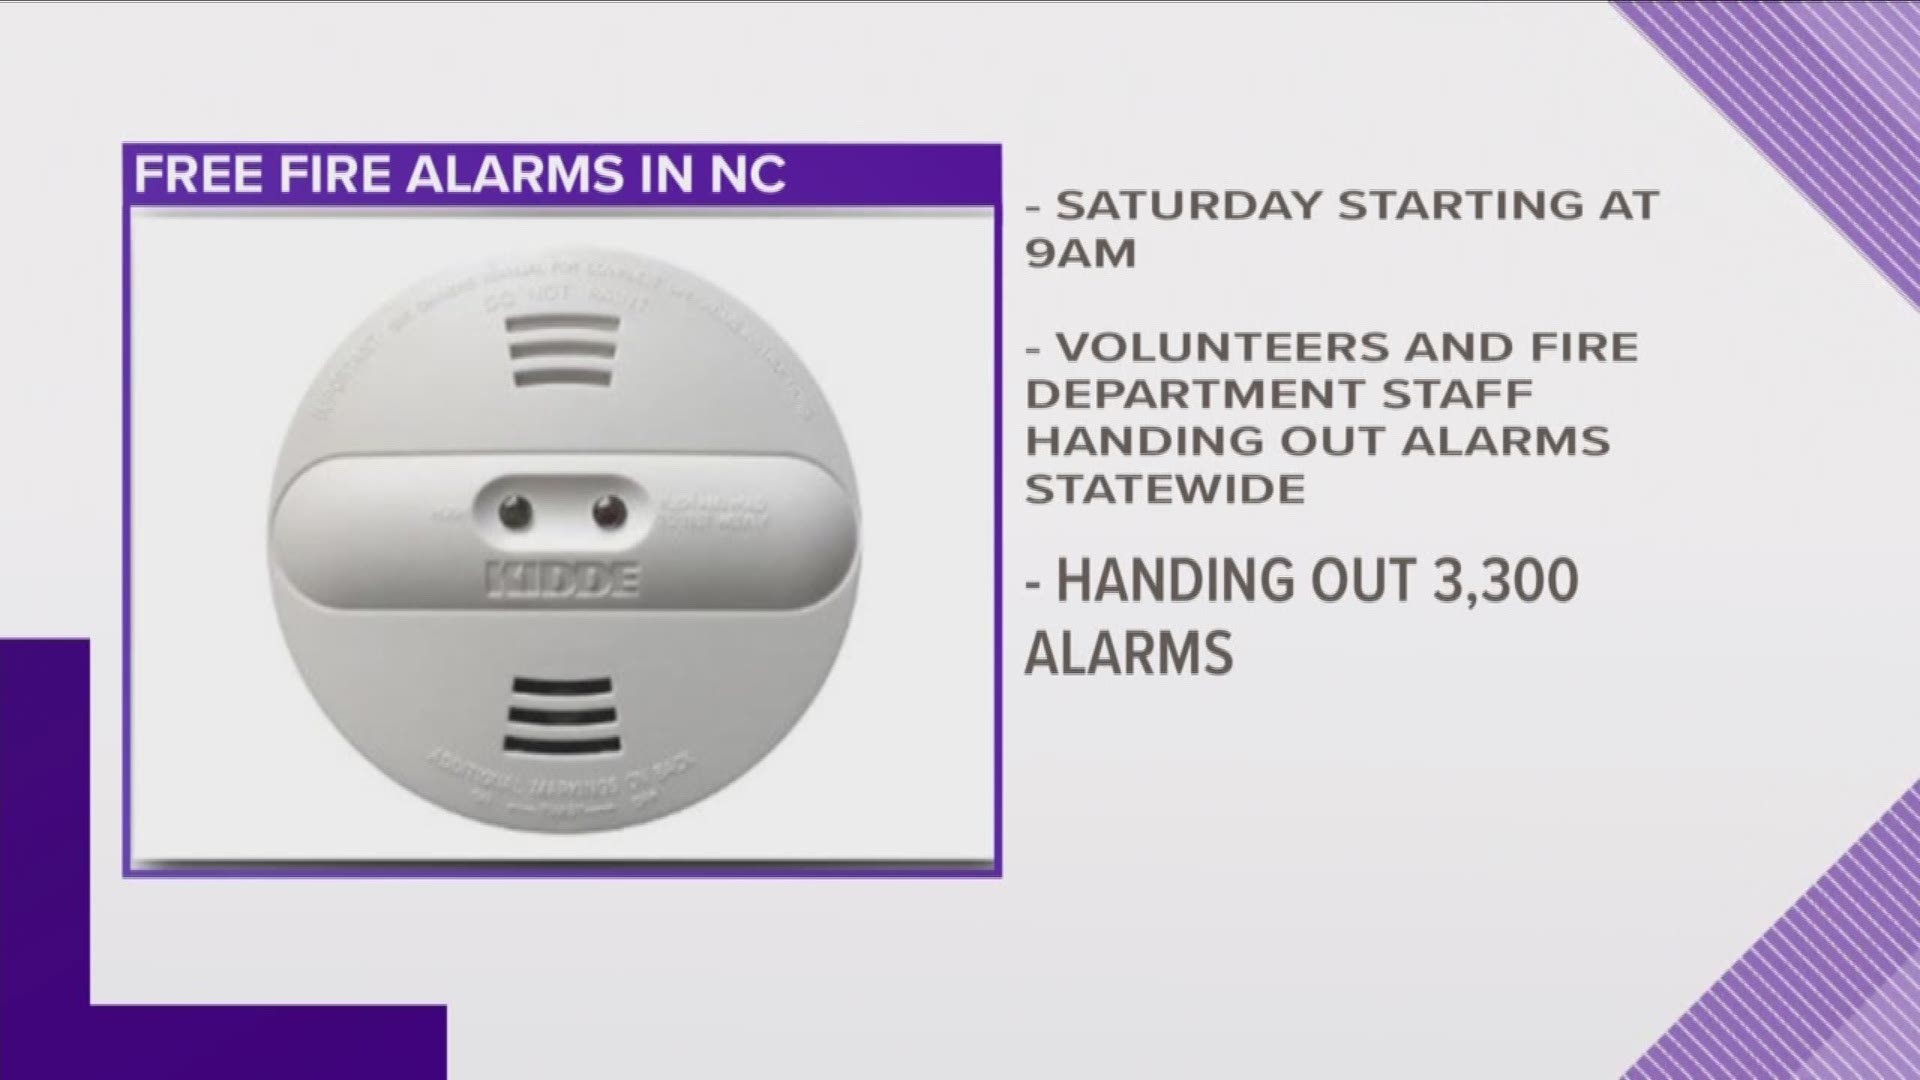 Saturday, June 23rd is a statewide day when fire departments will be canvassing neighborhoods and giving out free smoke alarms.